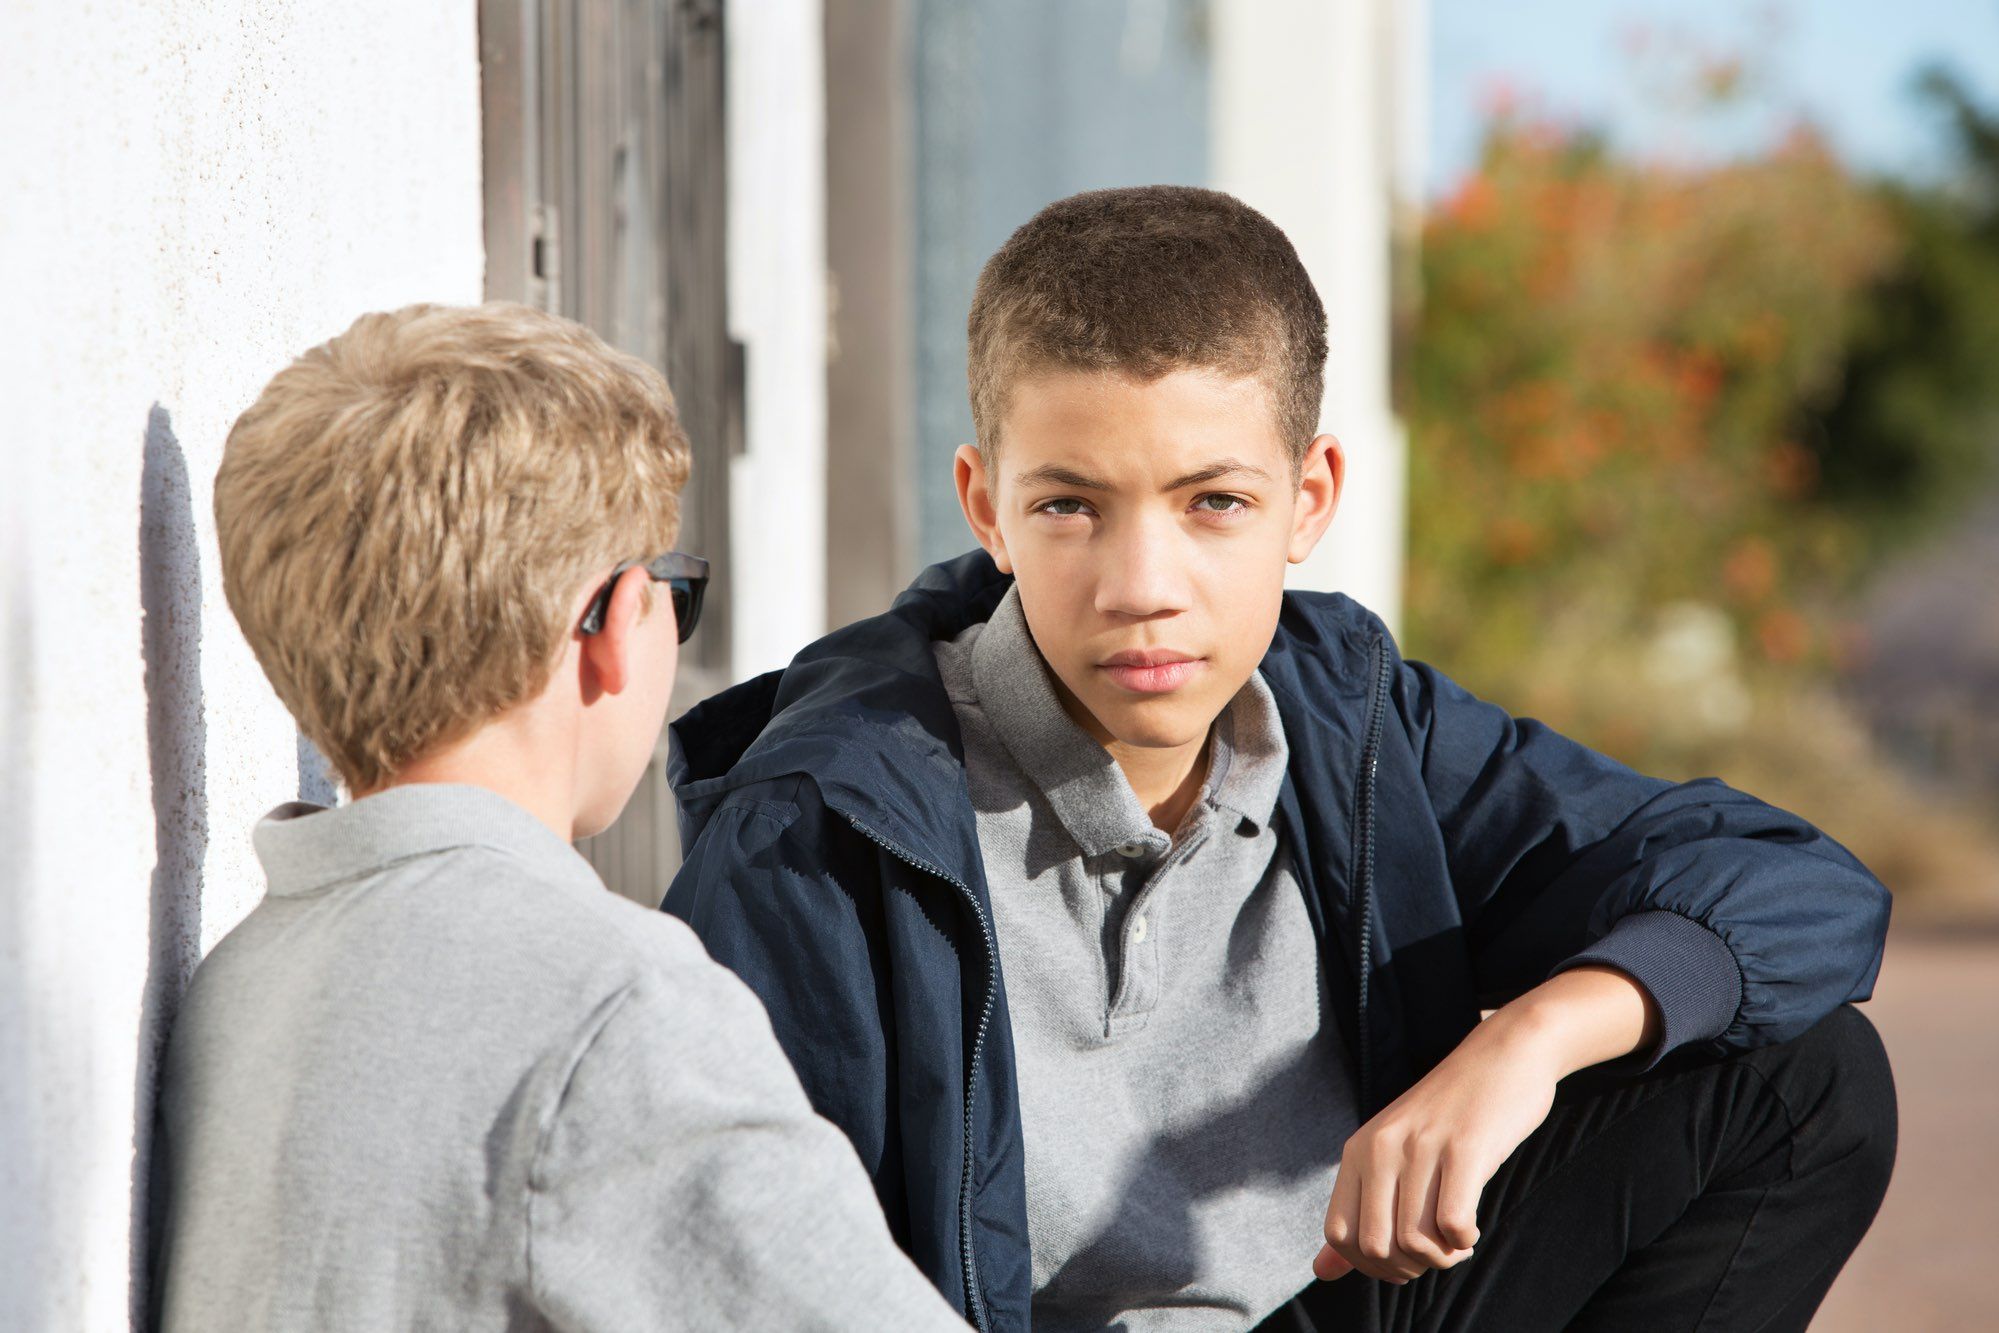 Two teen boys talking seriously outside